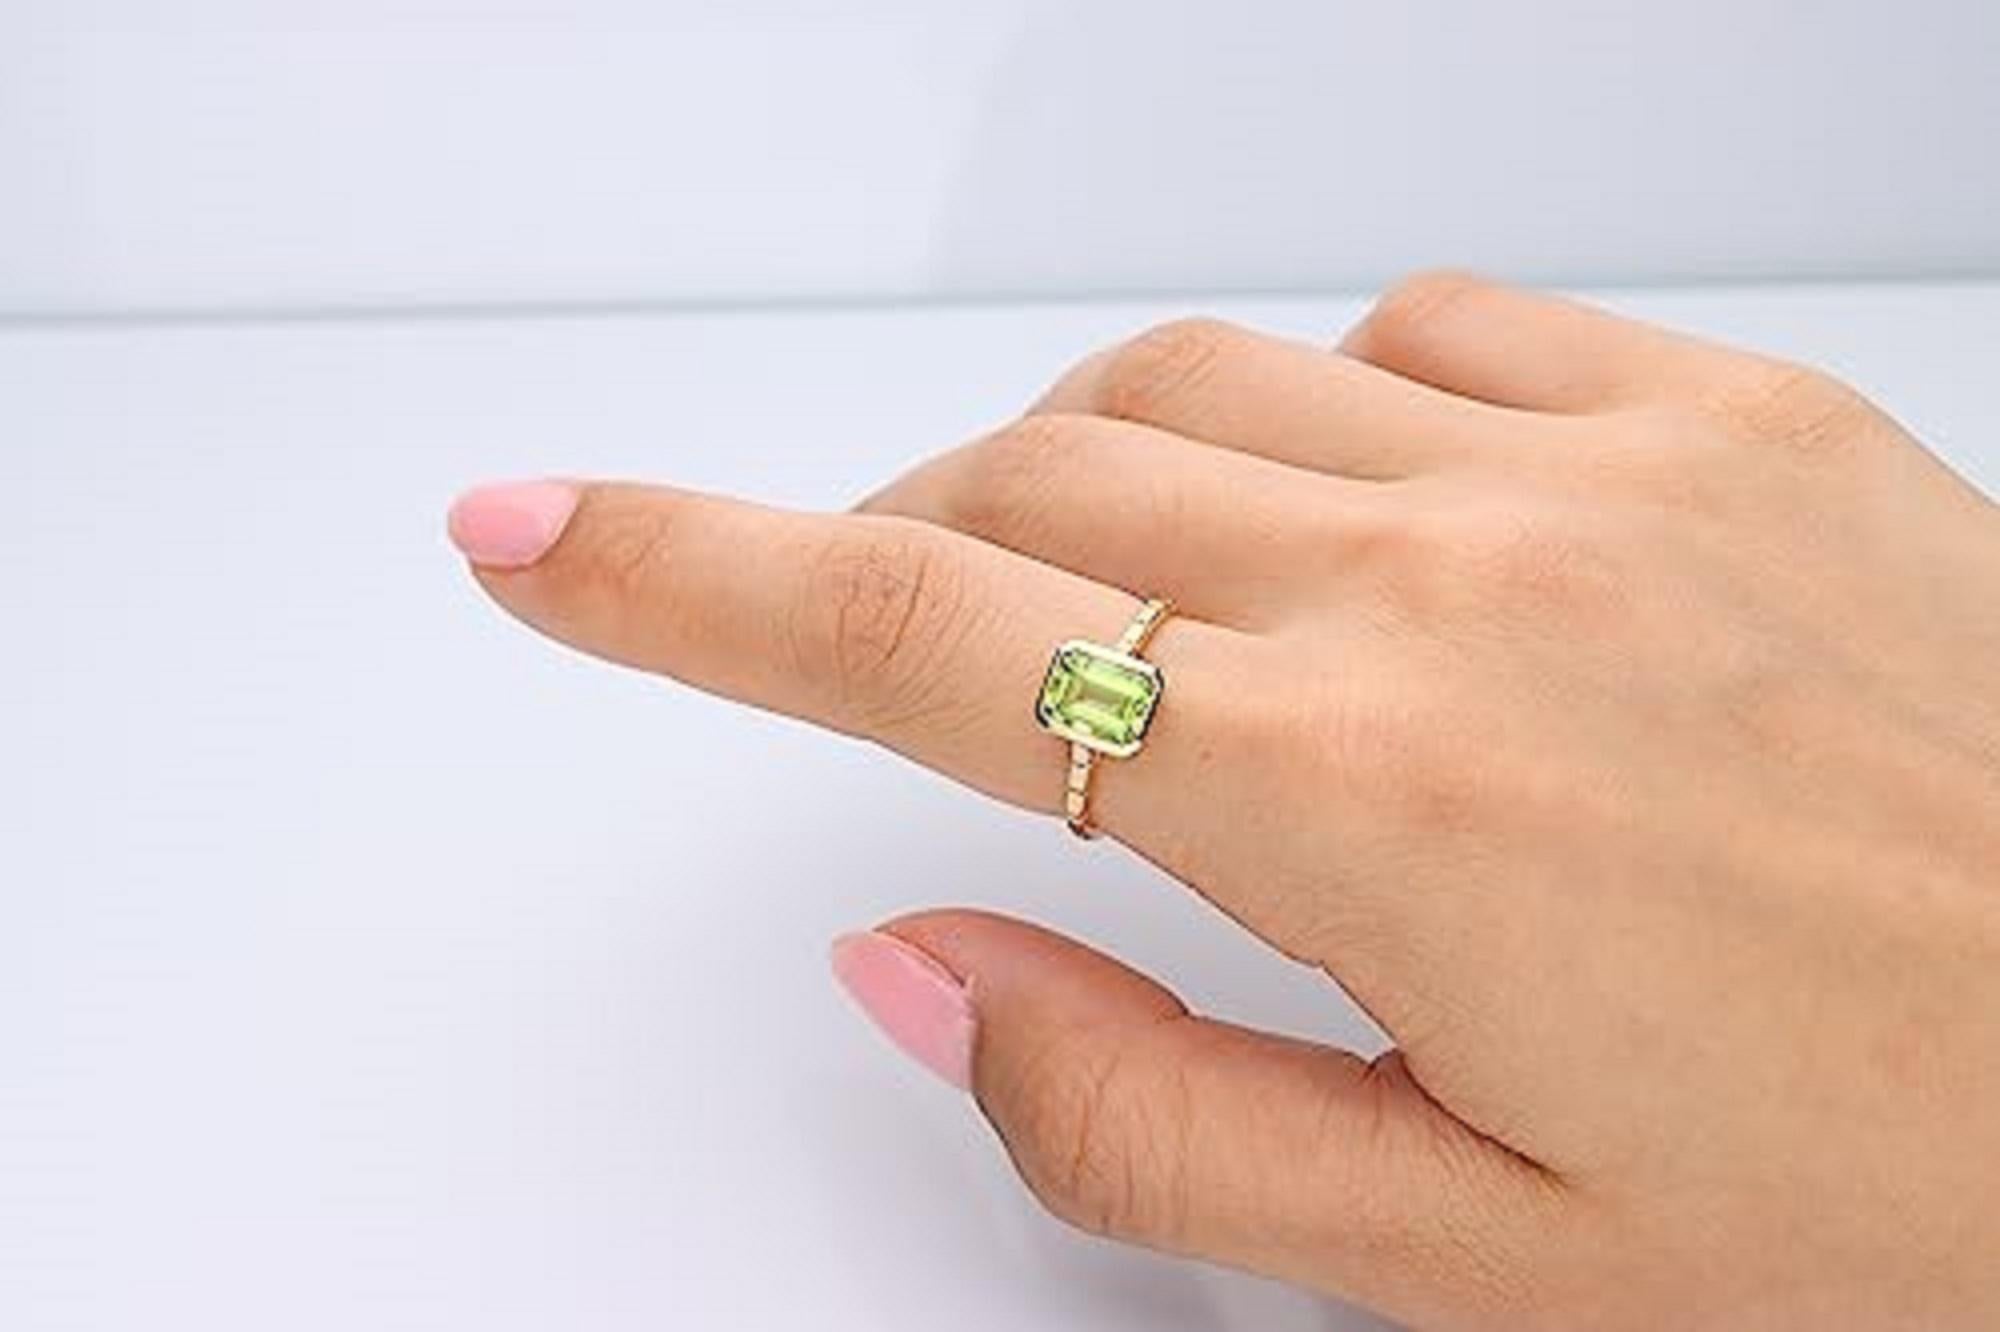 Decorate yourself in elegance with this Ring is crafted from 14-karat Yellow gold 6*8 Emerald-Cut Peridot (1 pcs) 1.64 carat. This Ring is weight 2.23 grams. This delicate Ring is polished to a high finish shine.